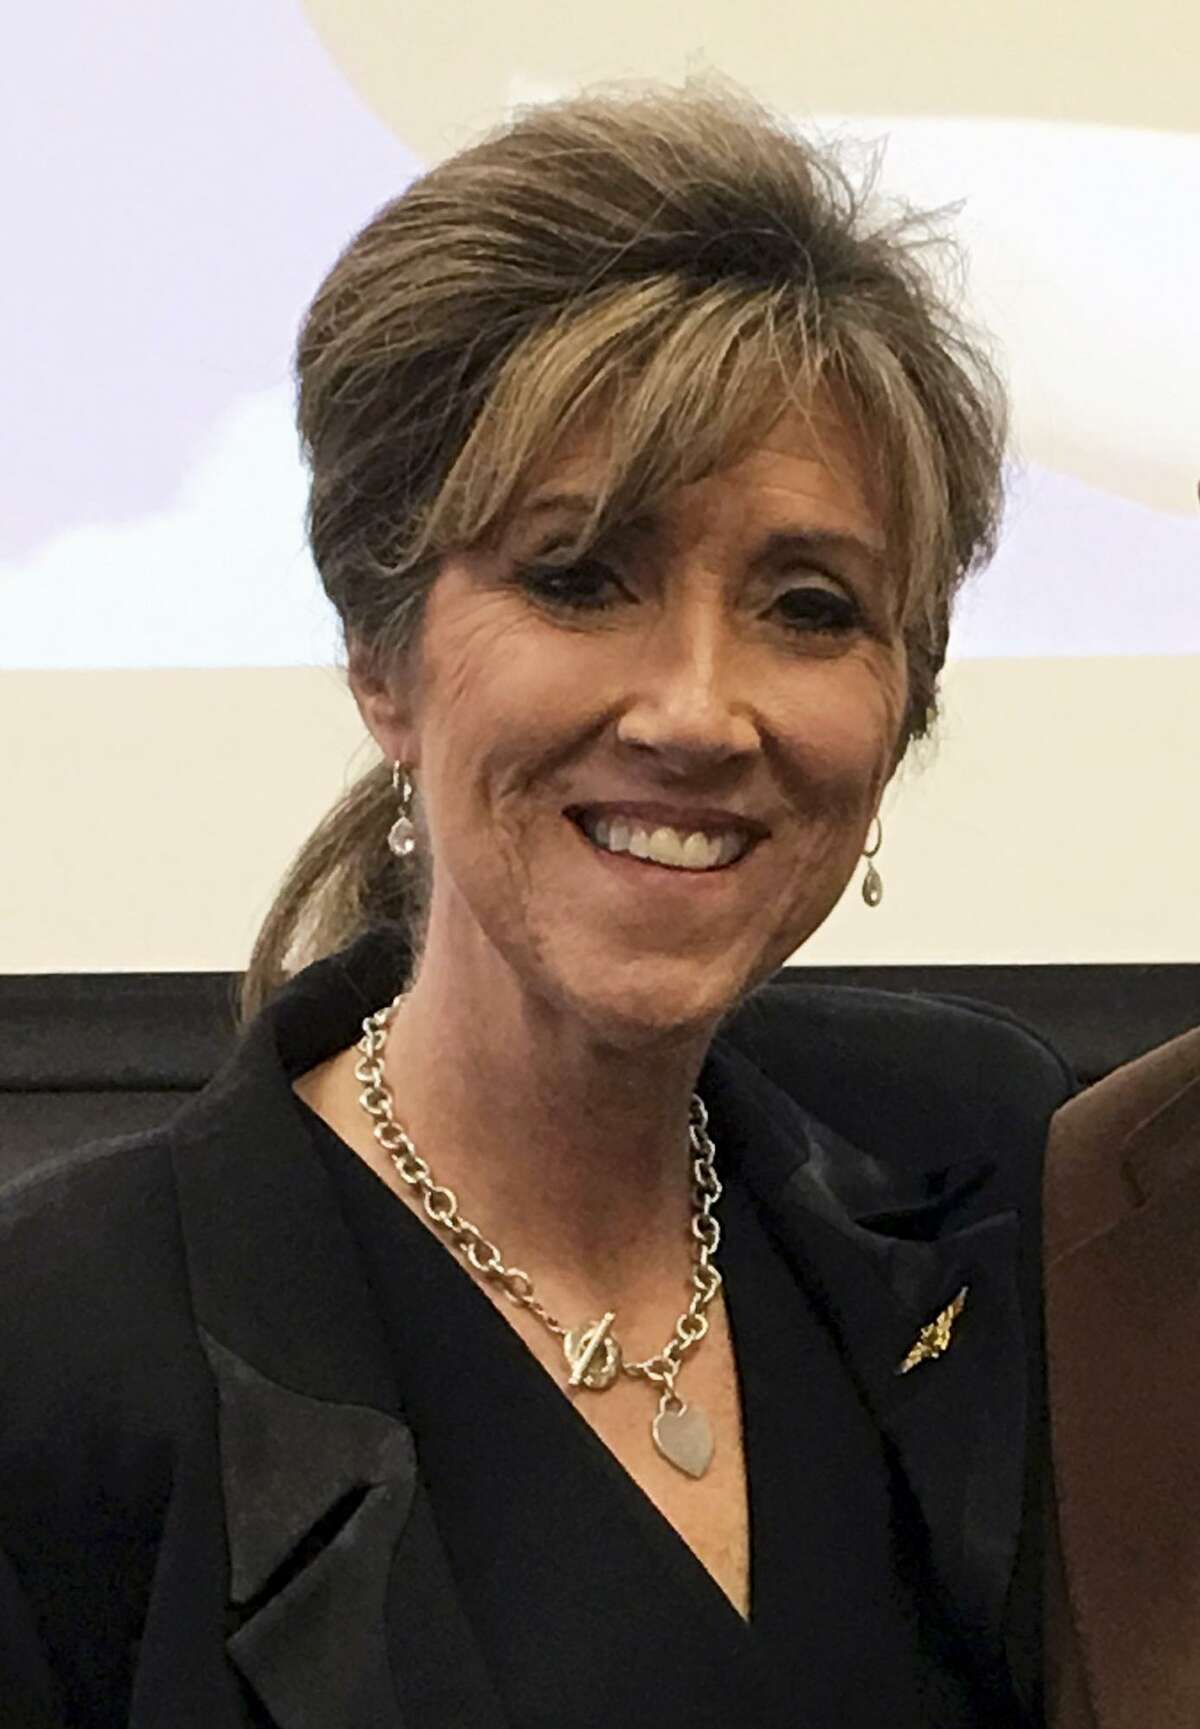 This March 20, 2017 photo provided by Kevin Garber at MidAmerica Nazarene University in Olathe, Kan., shows Tammie Jo Shults, one of the pilots of a Southwest Airlines twin-engine Boeing 737 bound from New York to Dallas that made an emergency landing at the Philadelphia International Airport after the aircraft blew one of its engines Tuesday, April 17, 2018. (Kevin Garber/MidAmerica Nazarene University via AP)